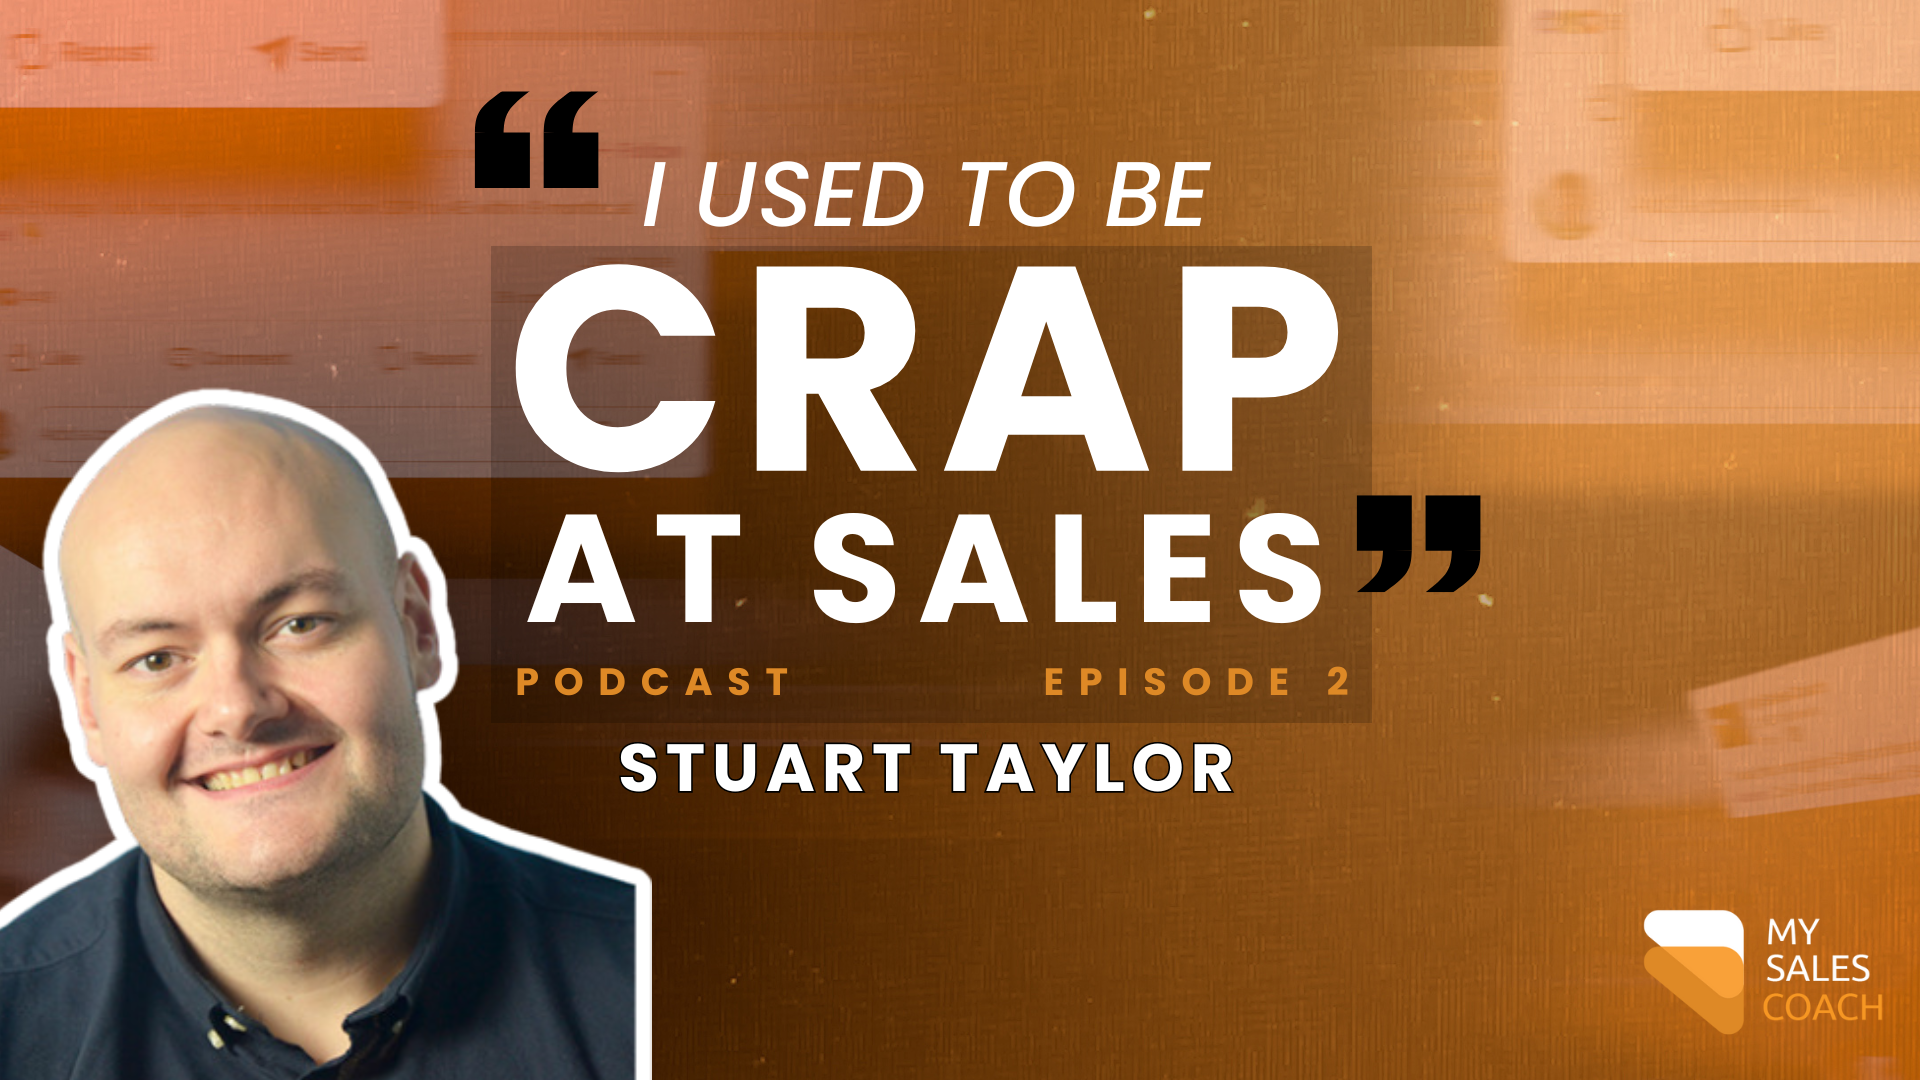 I used to be crap at sales, episode 2, Stuart Taylor